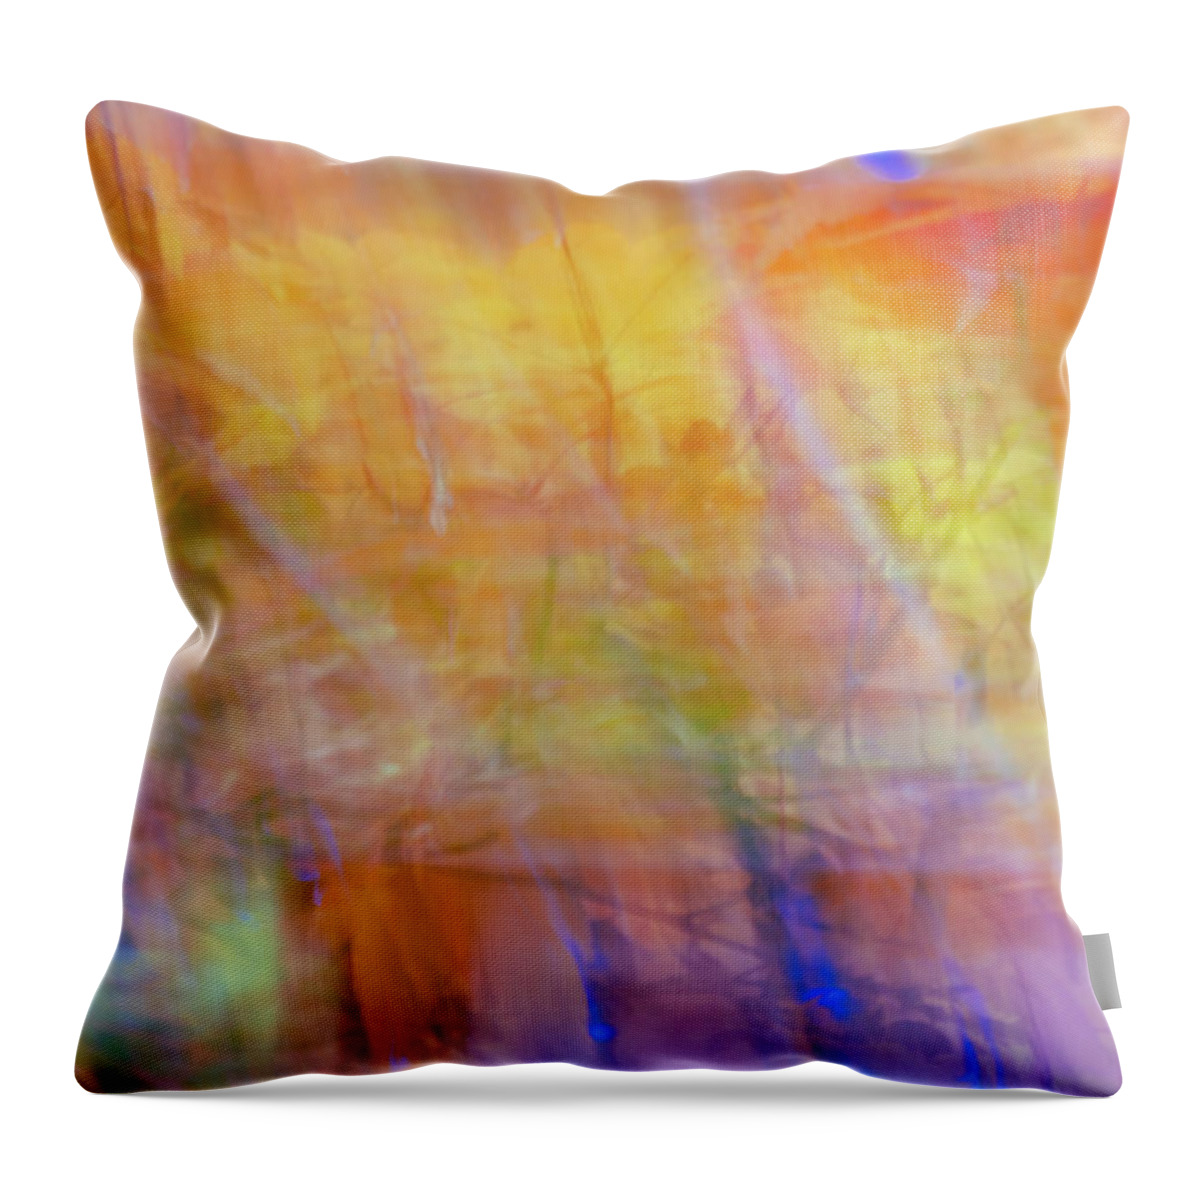 Autumn Throw Pillow featuring the photograph Warming Up - Autumn Abstract by Ada Weyland